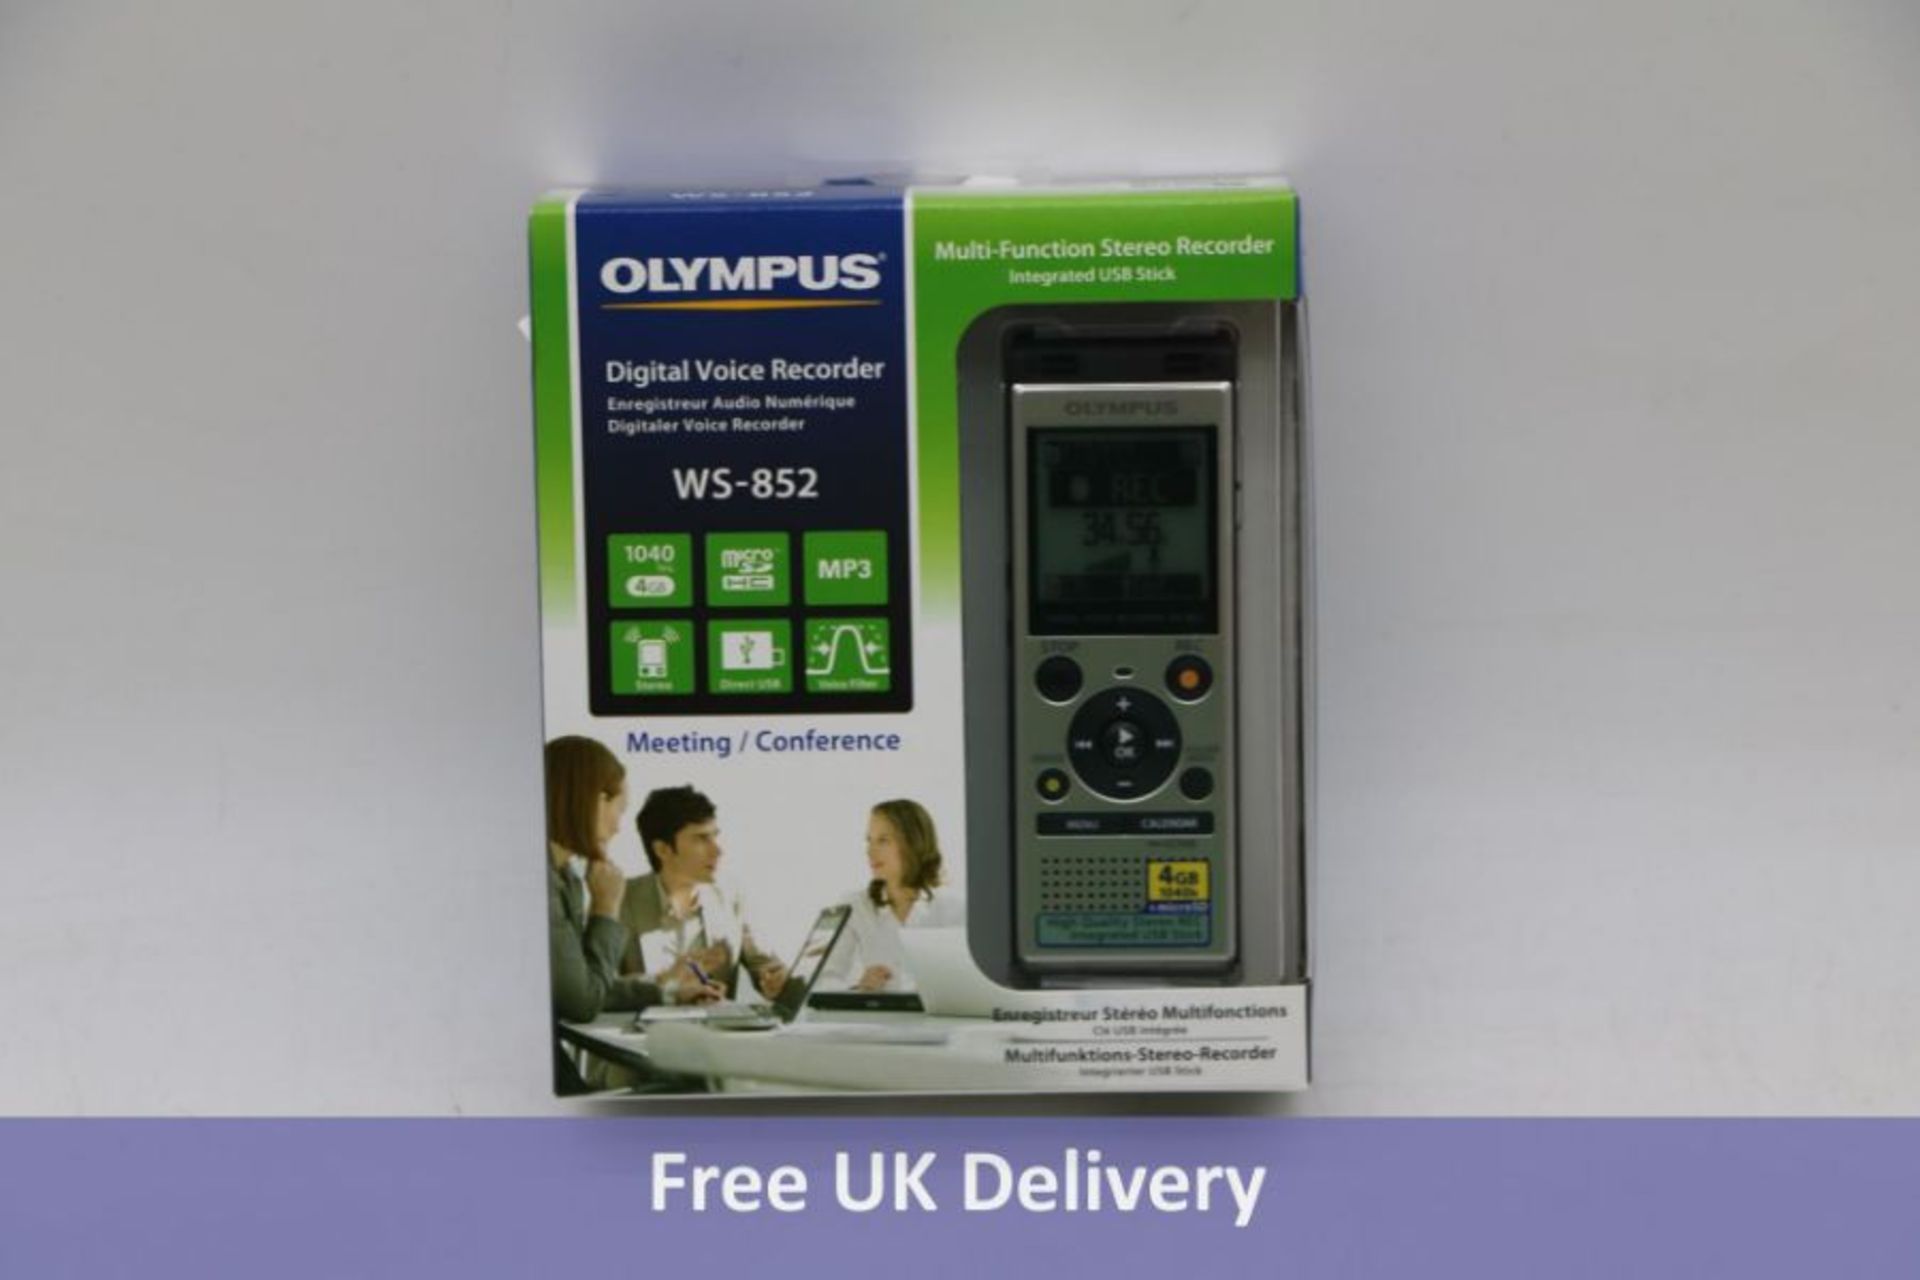 Olympus WS-852 High-Quality Digital Voice Recorder with Stereo Microphones, 4 GB Memory